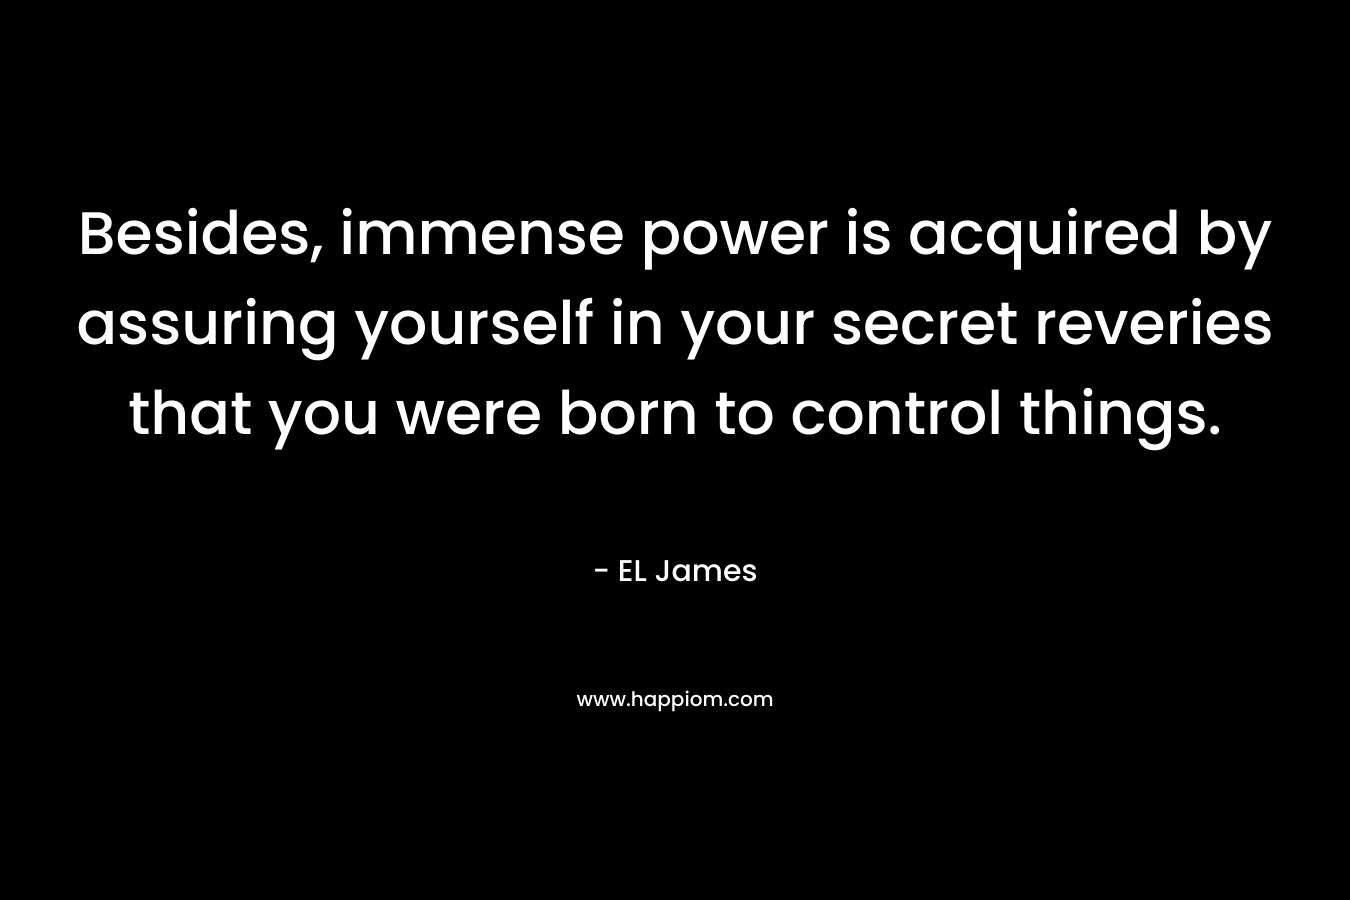 Besides, immense power is acquired by assuring yourself in your secret reveries that you were born to control things.